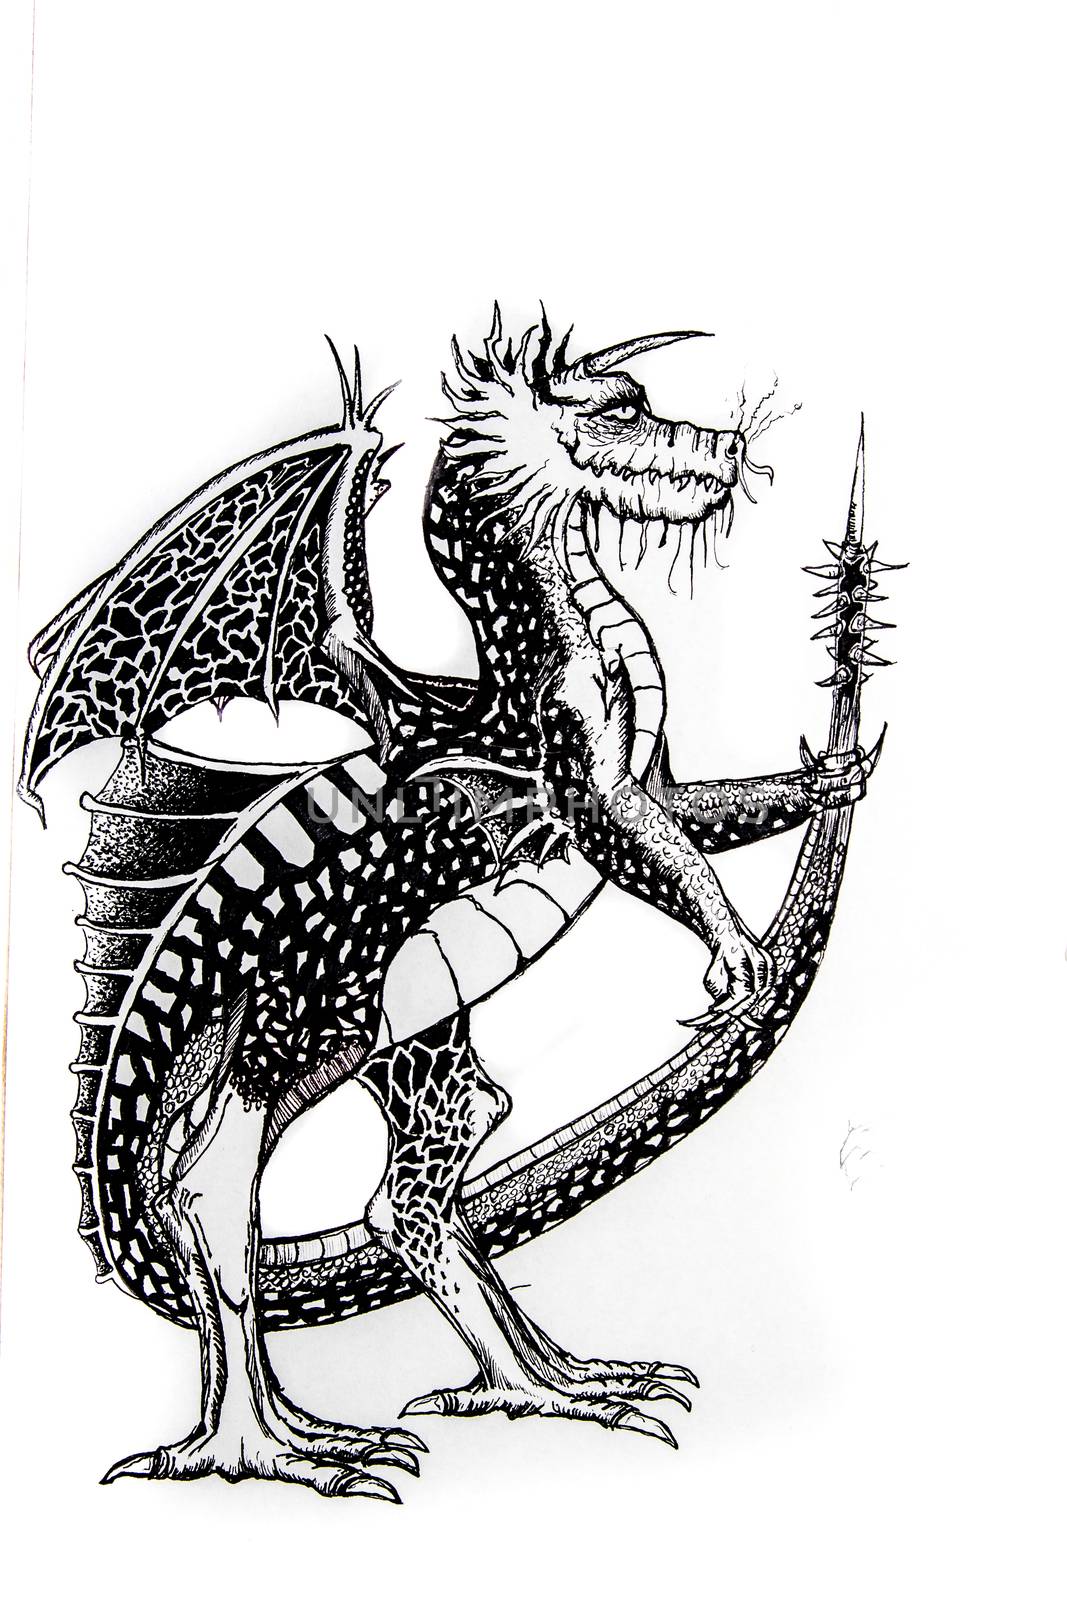 Dragon made with ink, tattoo sketch illustration by FernandoCortes